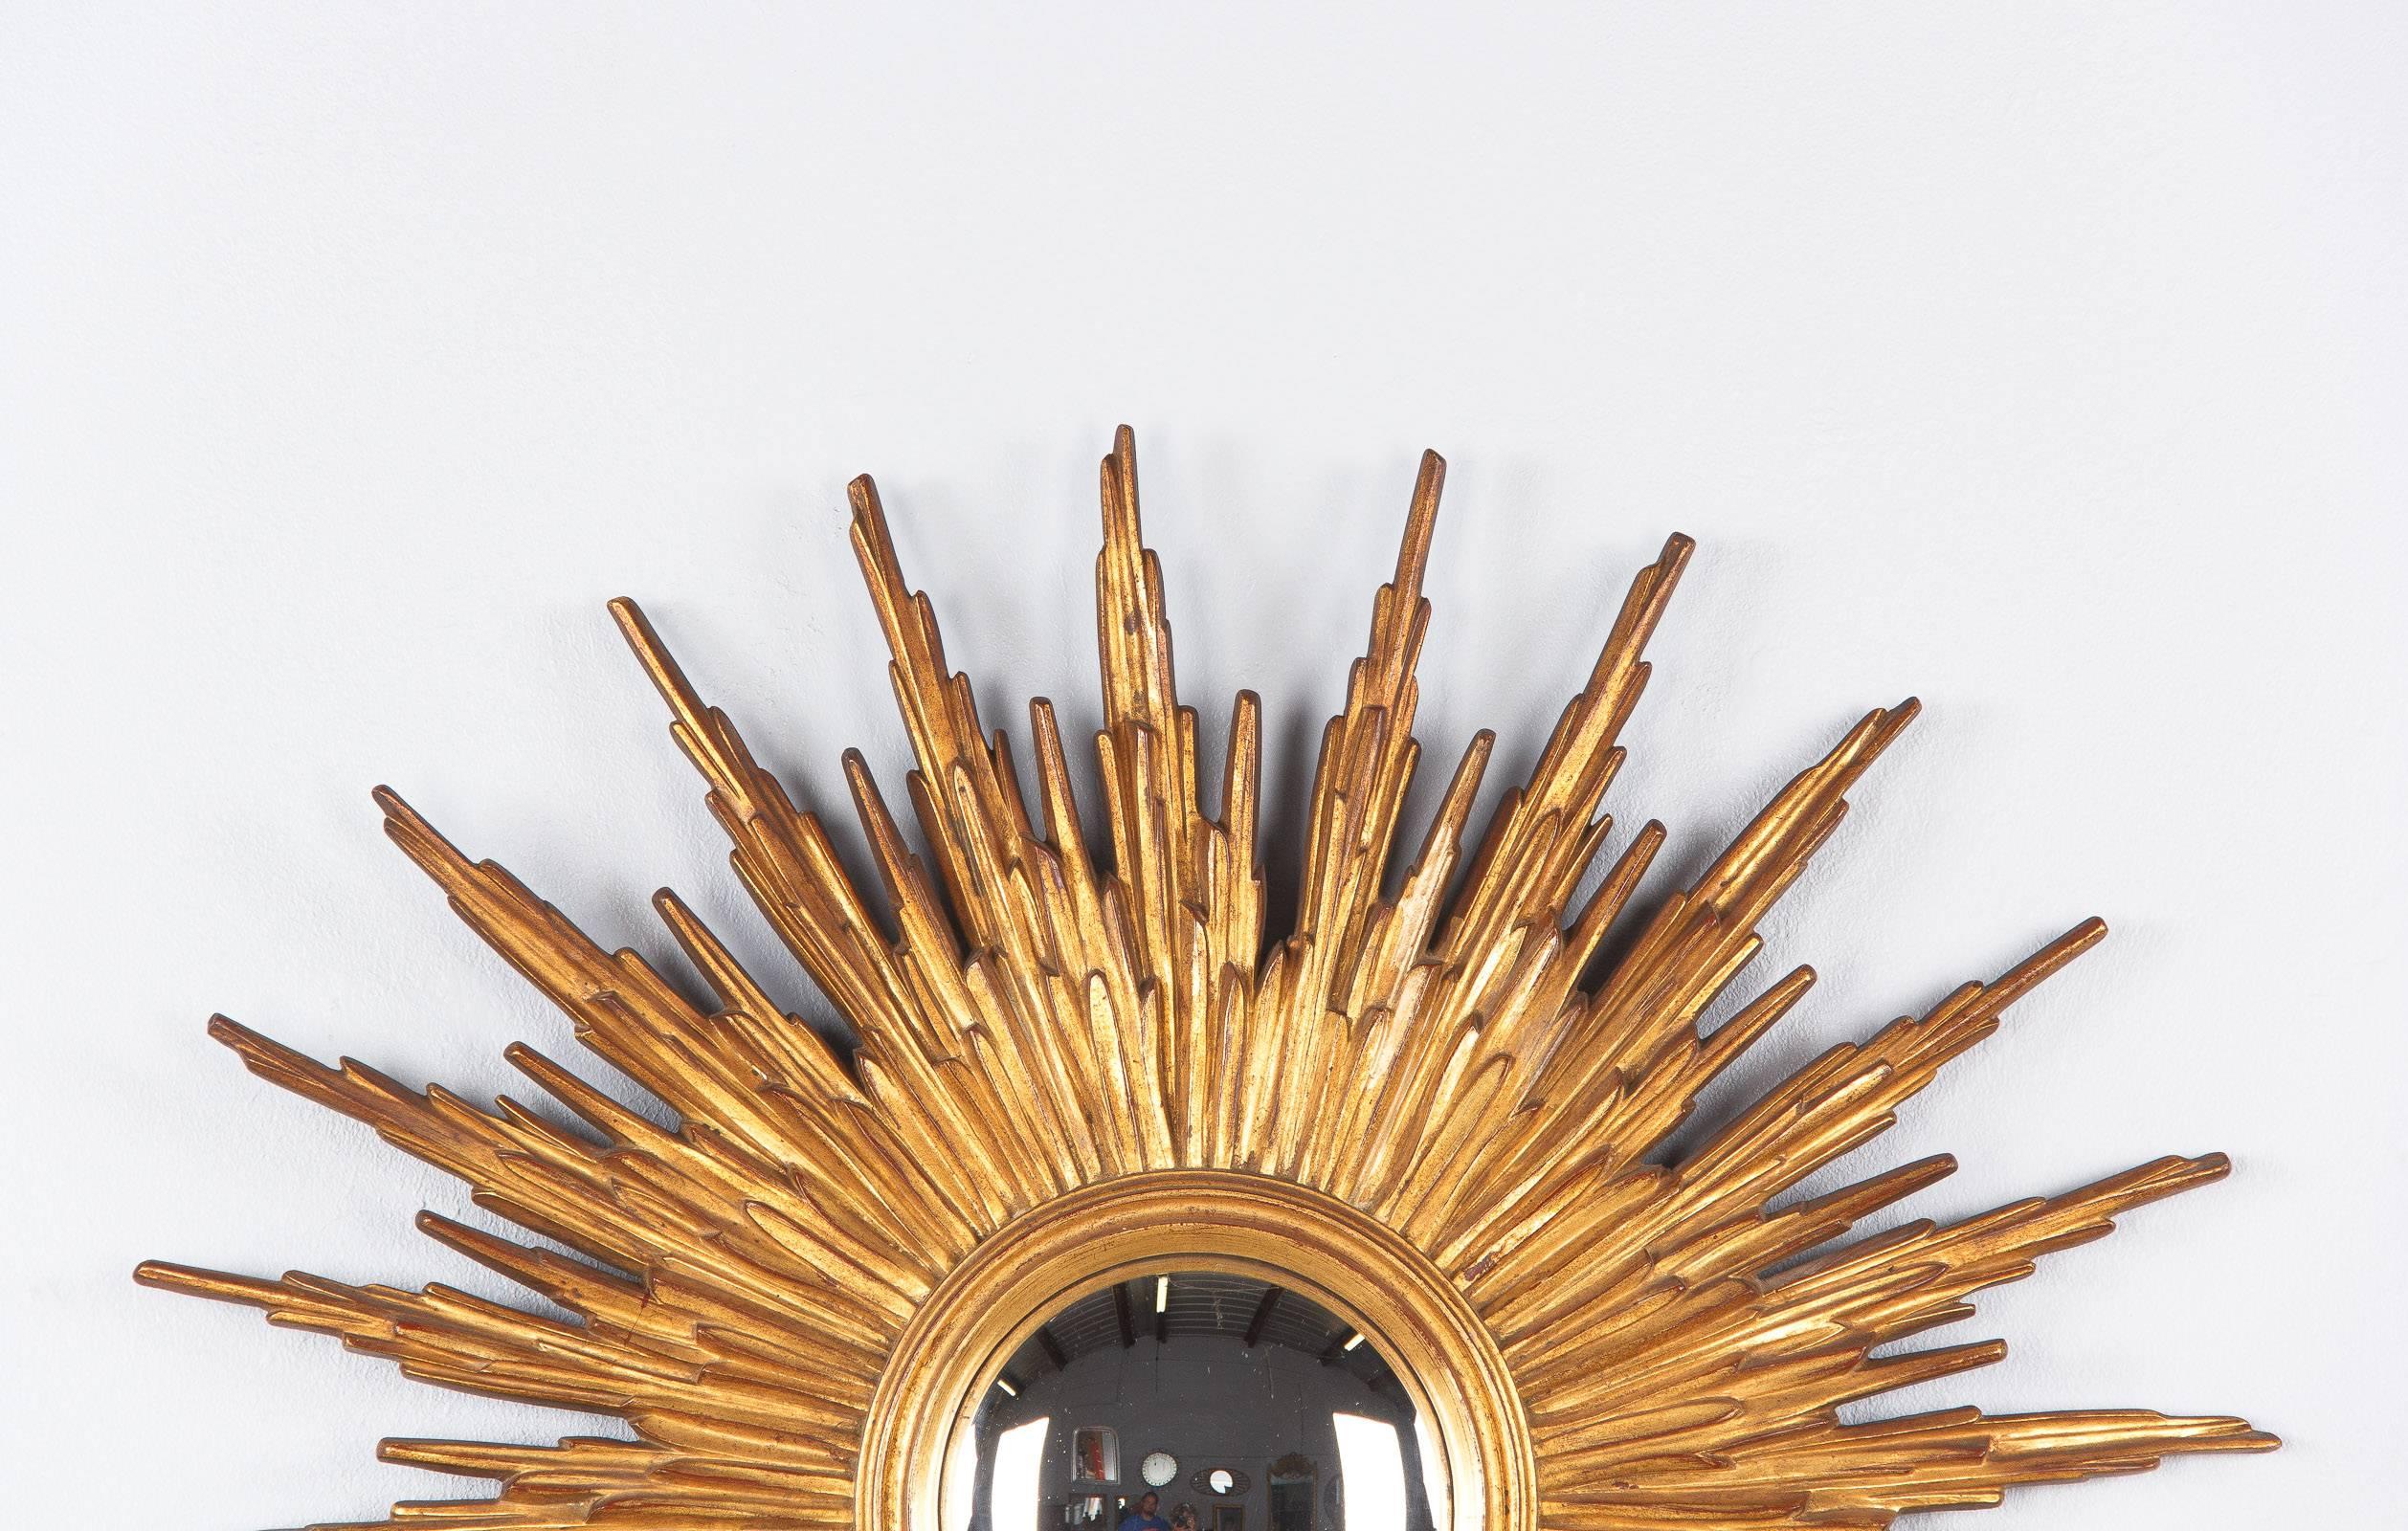 A Sunburst or Starbust mirror from France, circa 1950s with a molded frame made of gilded composite wood. The convex glass measures 7.25